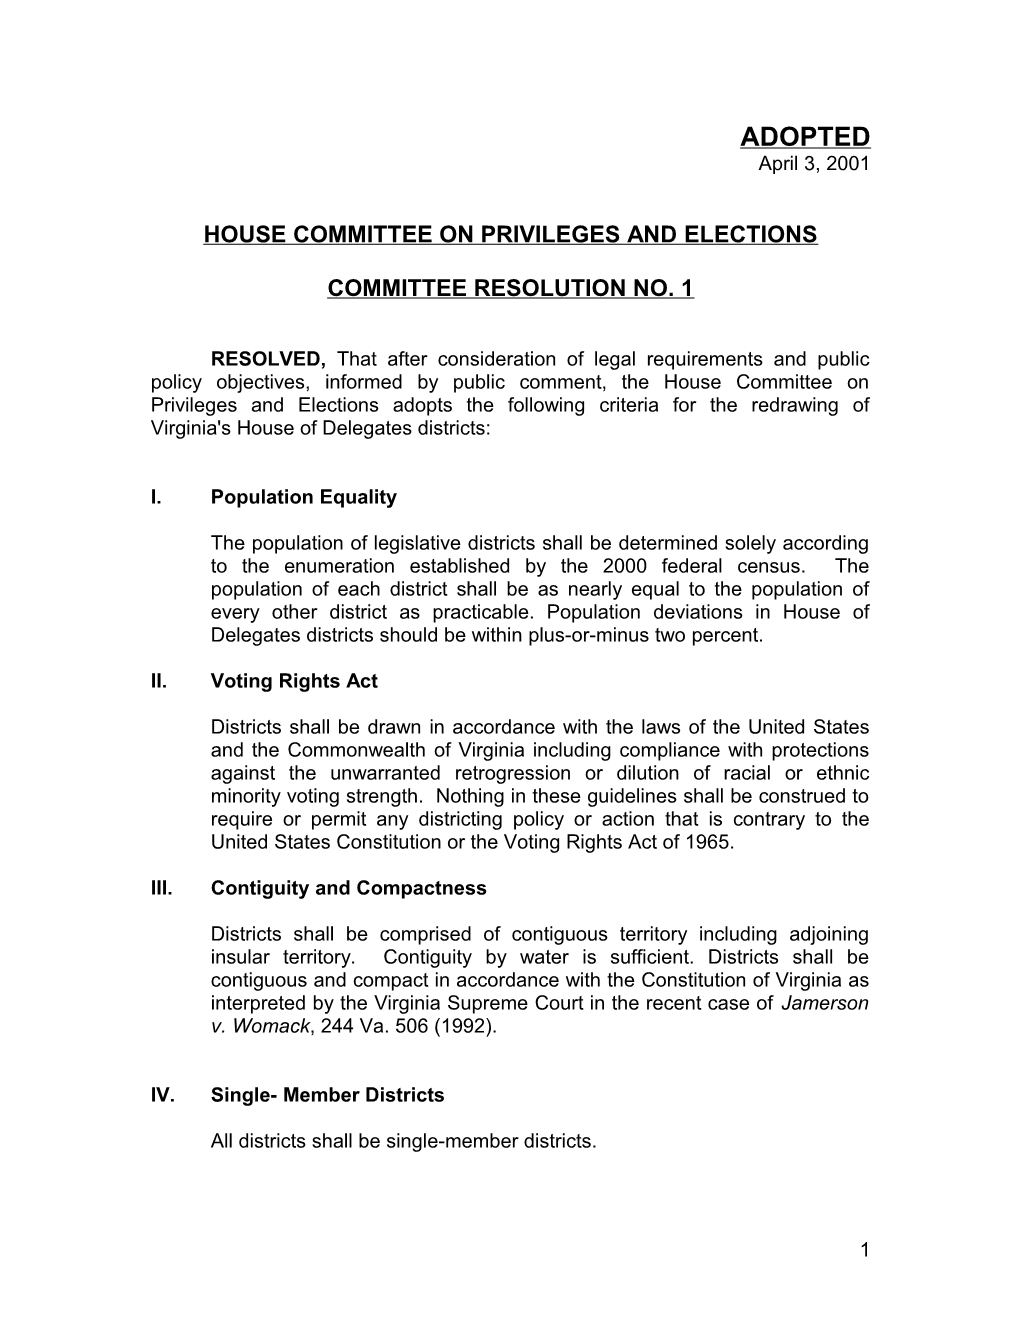 House Committee on Privileges and Elections